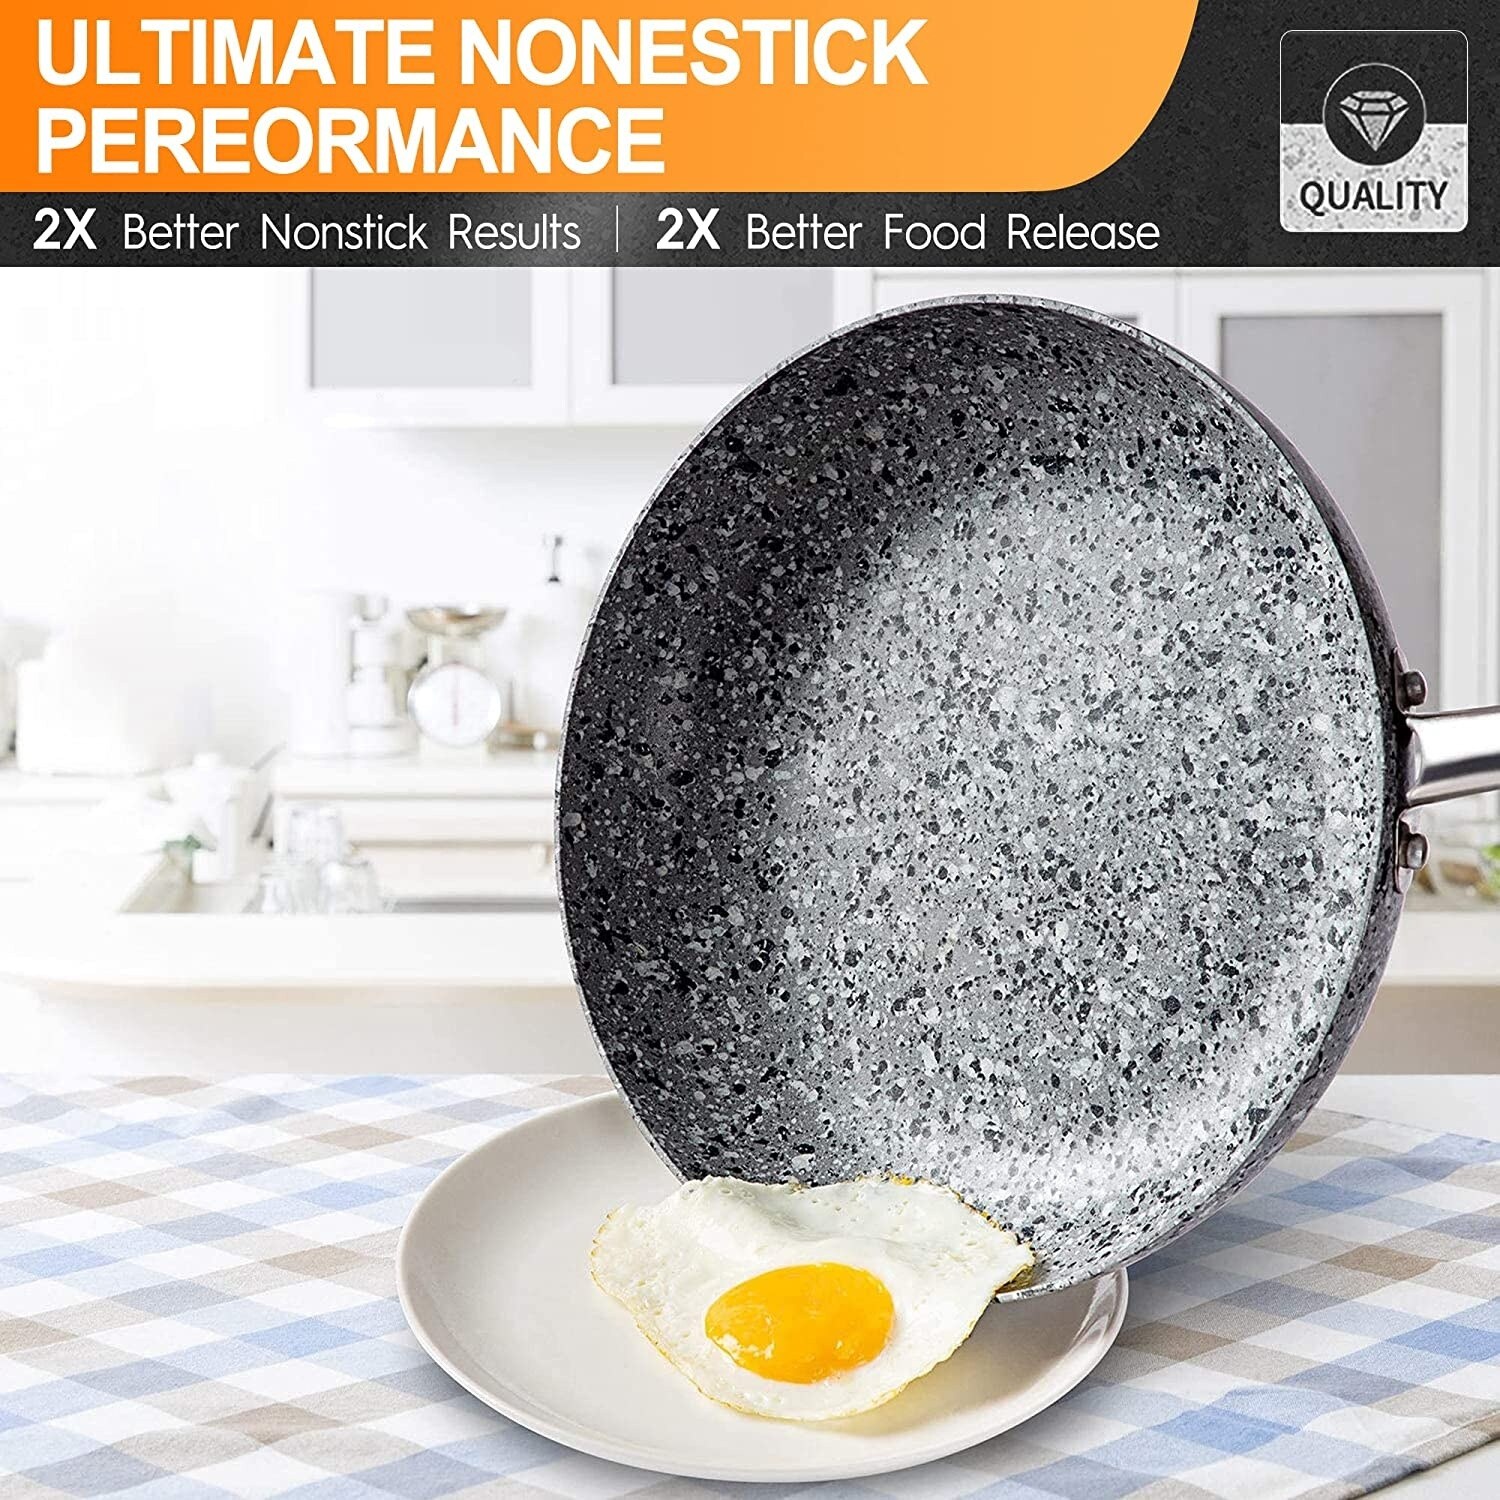 https://ak1.ostkcdn.com/images/products/is/images/direct/8138b065270ac381acd3ab58a0f8c1fe8112680d/MICHELANGELO-Stone-Cookware-Set-10-Piece%2C-Ultra-Nonstick-Granite-Pots-and-Pans---10-Piece.jpg